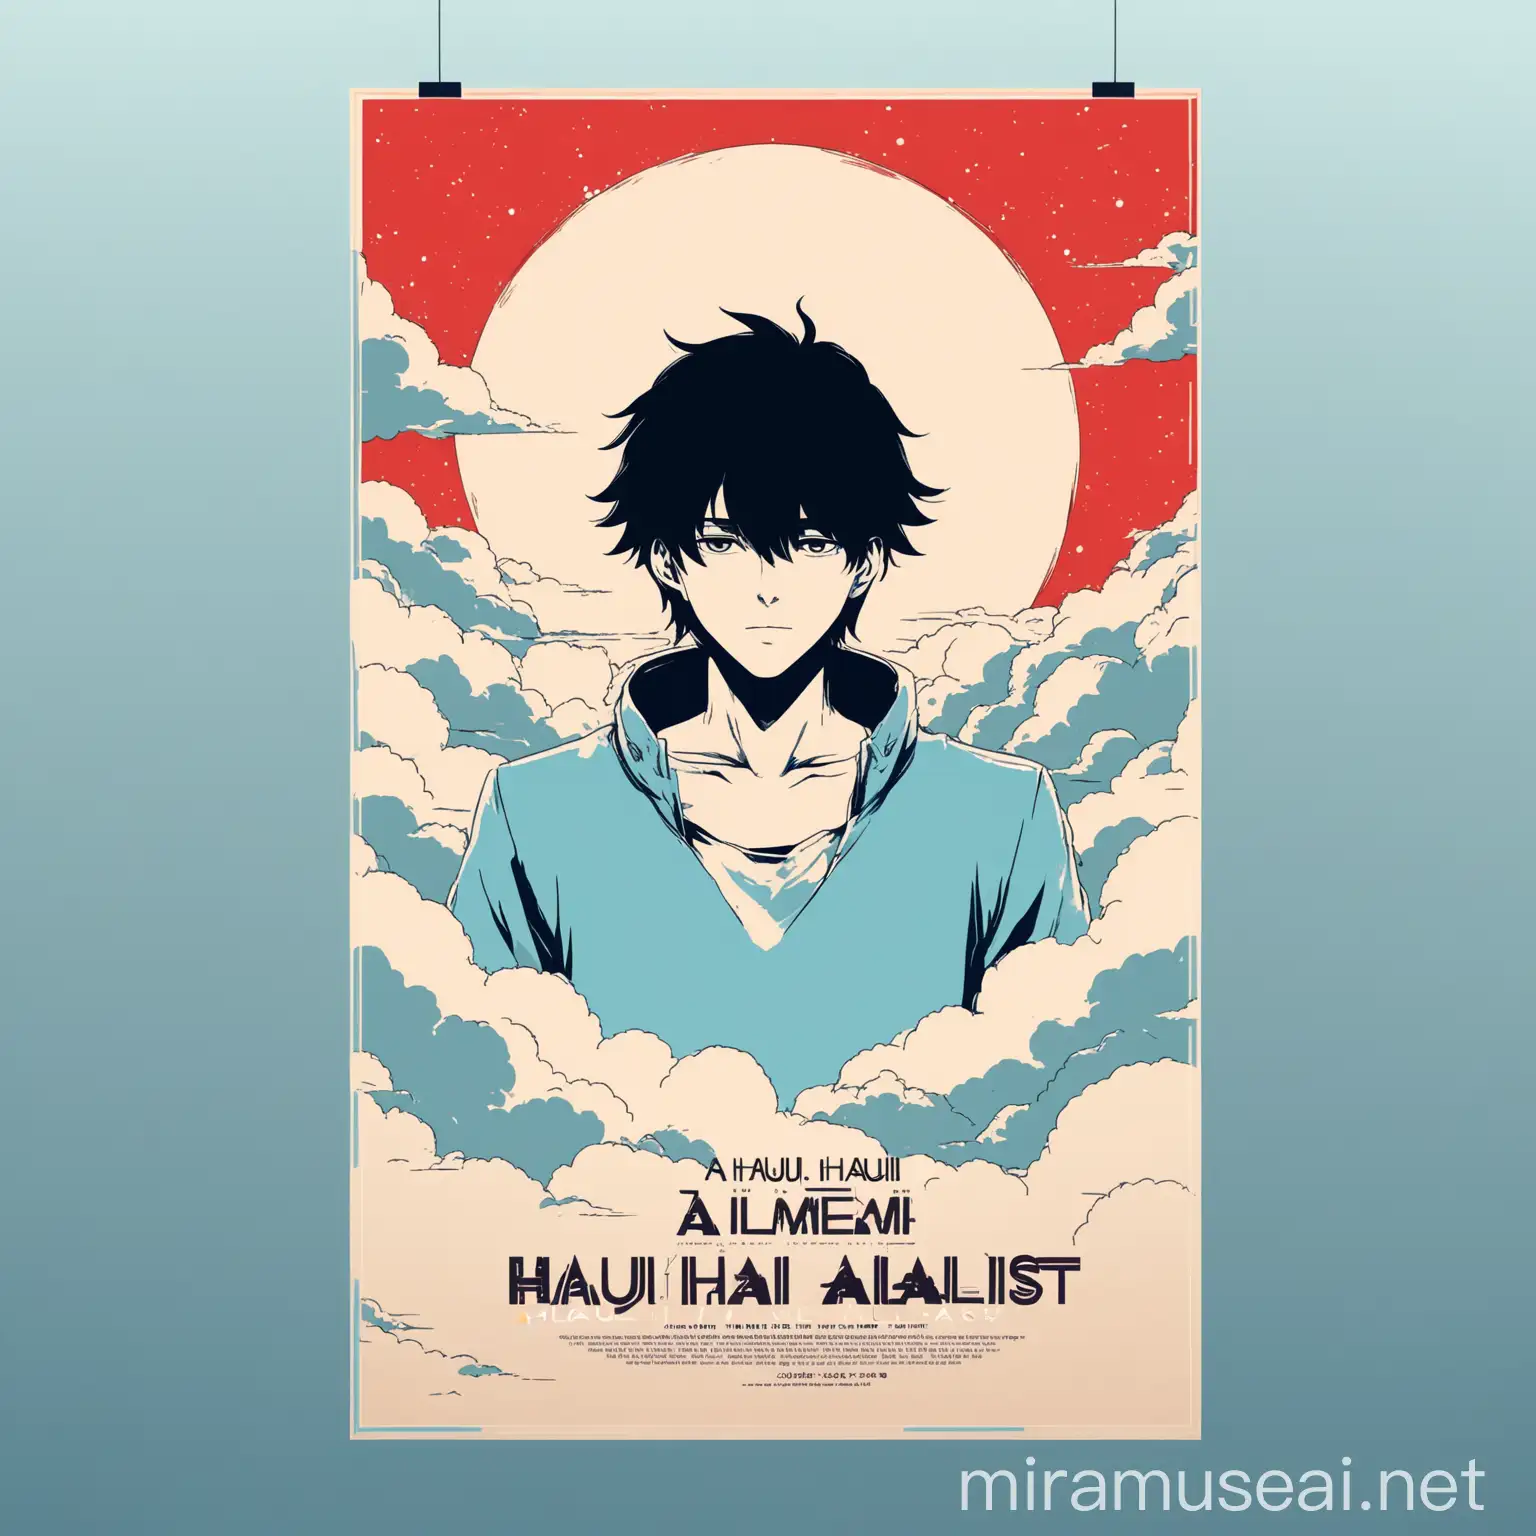 Minimalist Anime Poster Design Mysterious Man in Clouds Space